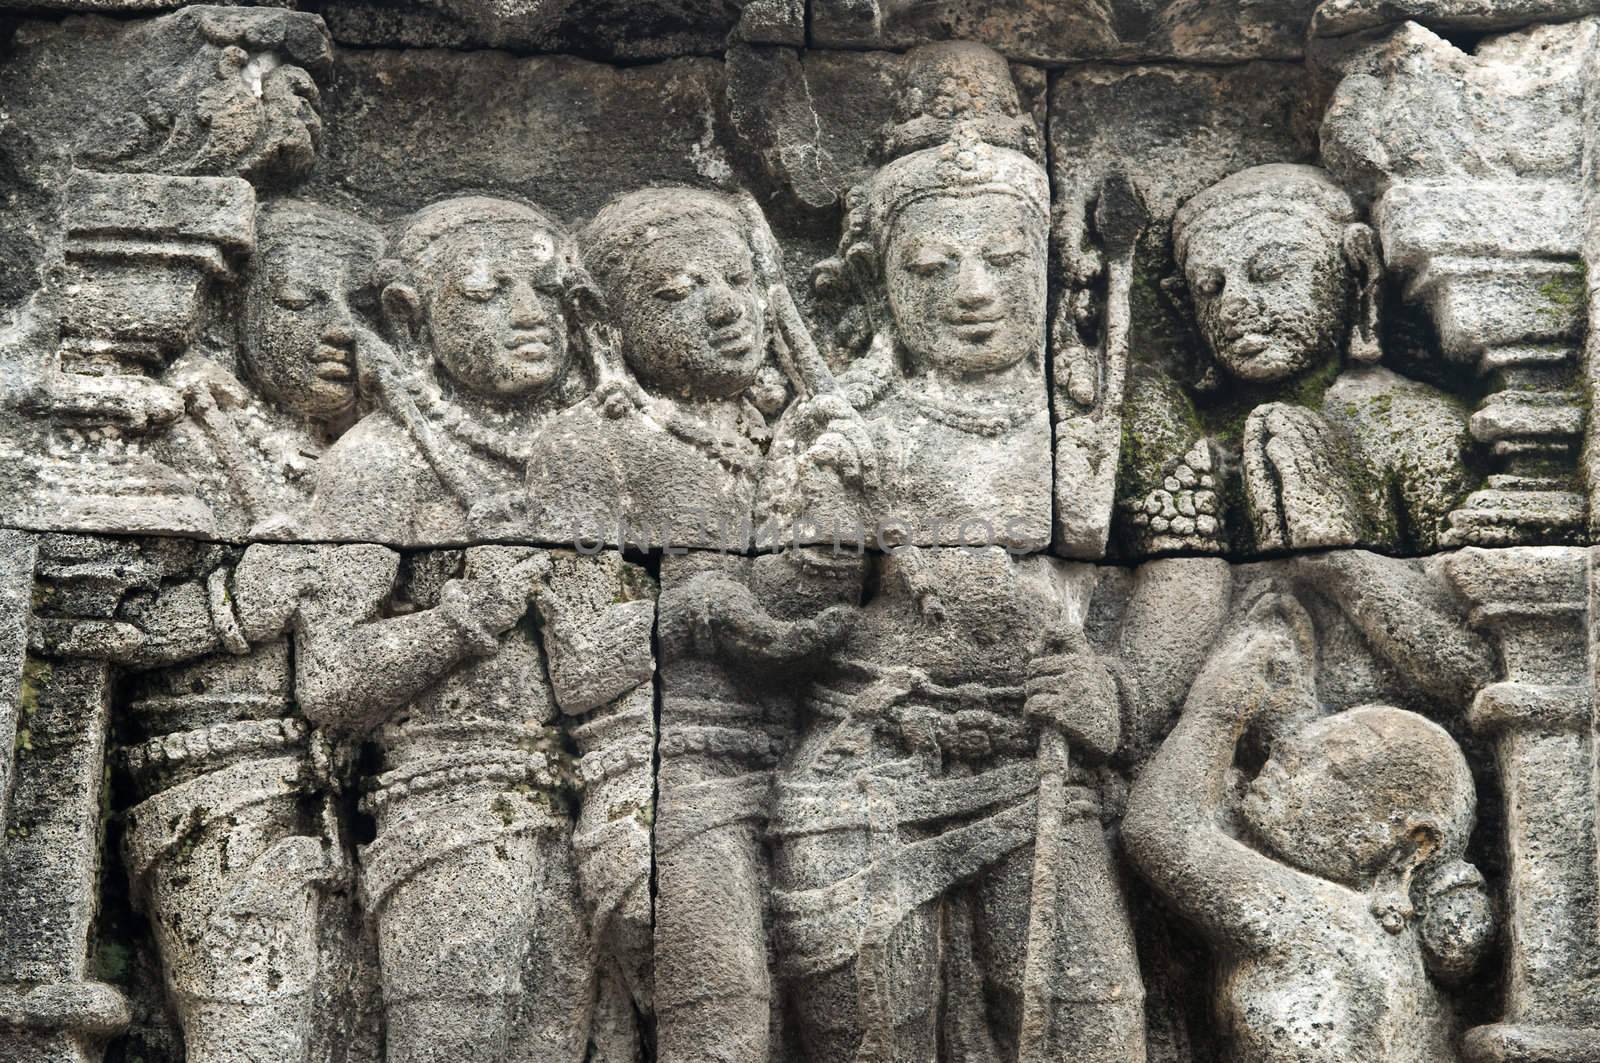 Detail of carved relief at Borobudur on Java, Indonesia.